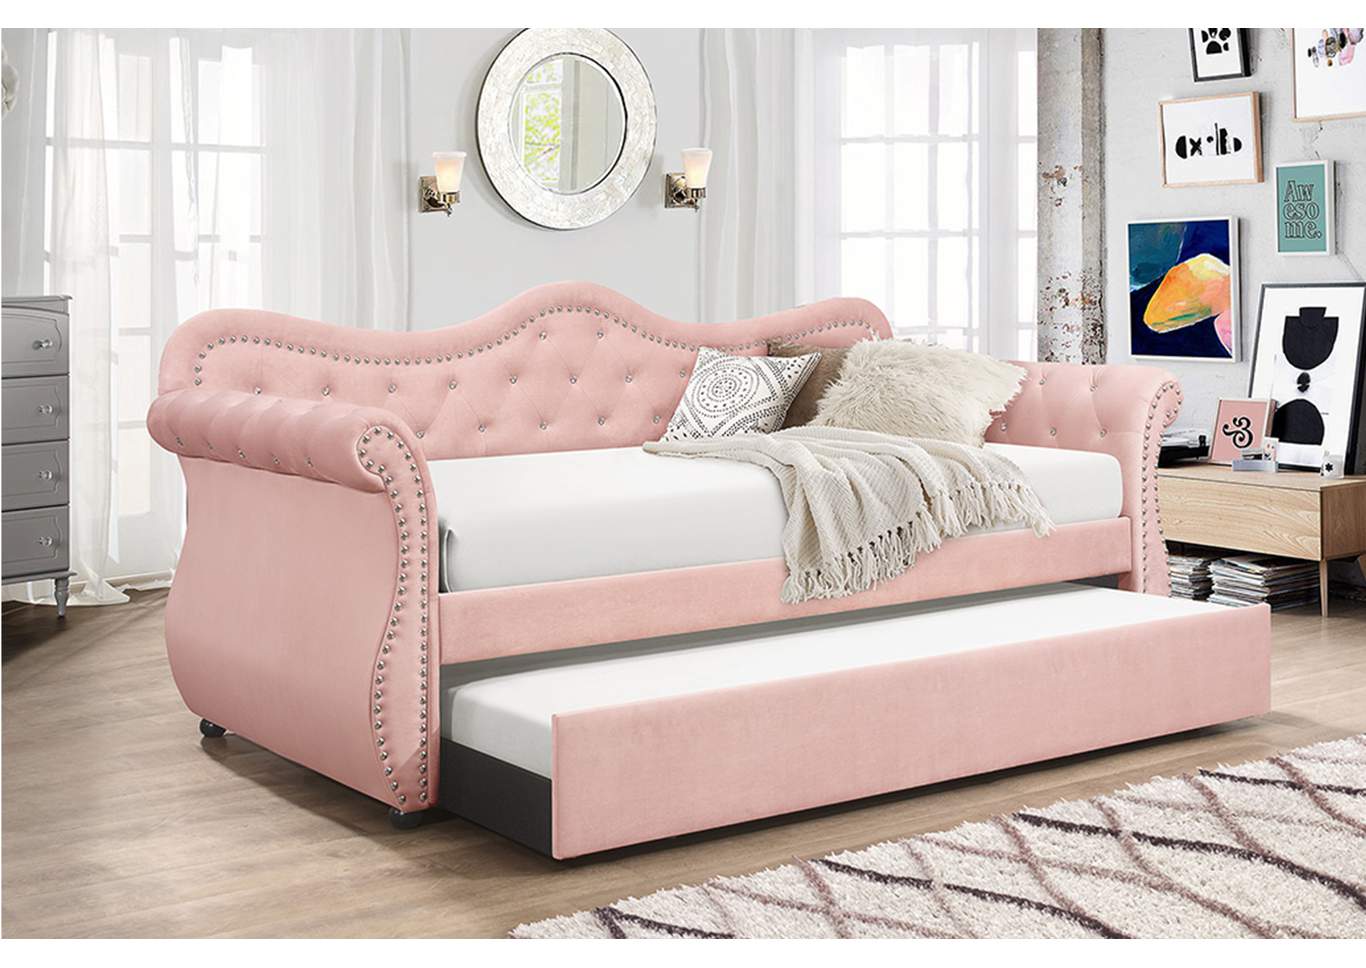 Pink Day Bed,Galaxy Home Furniture